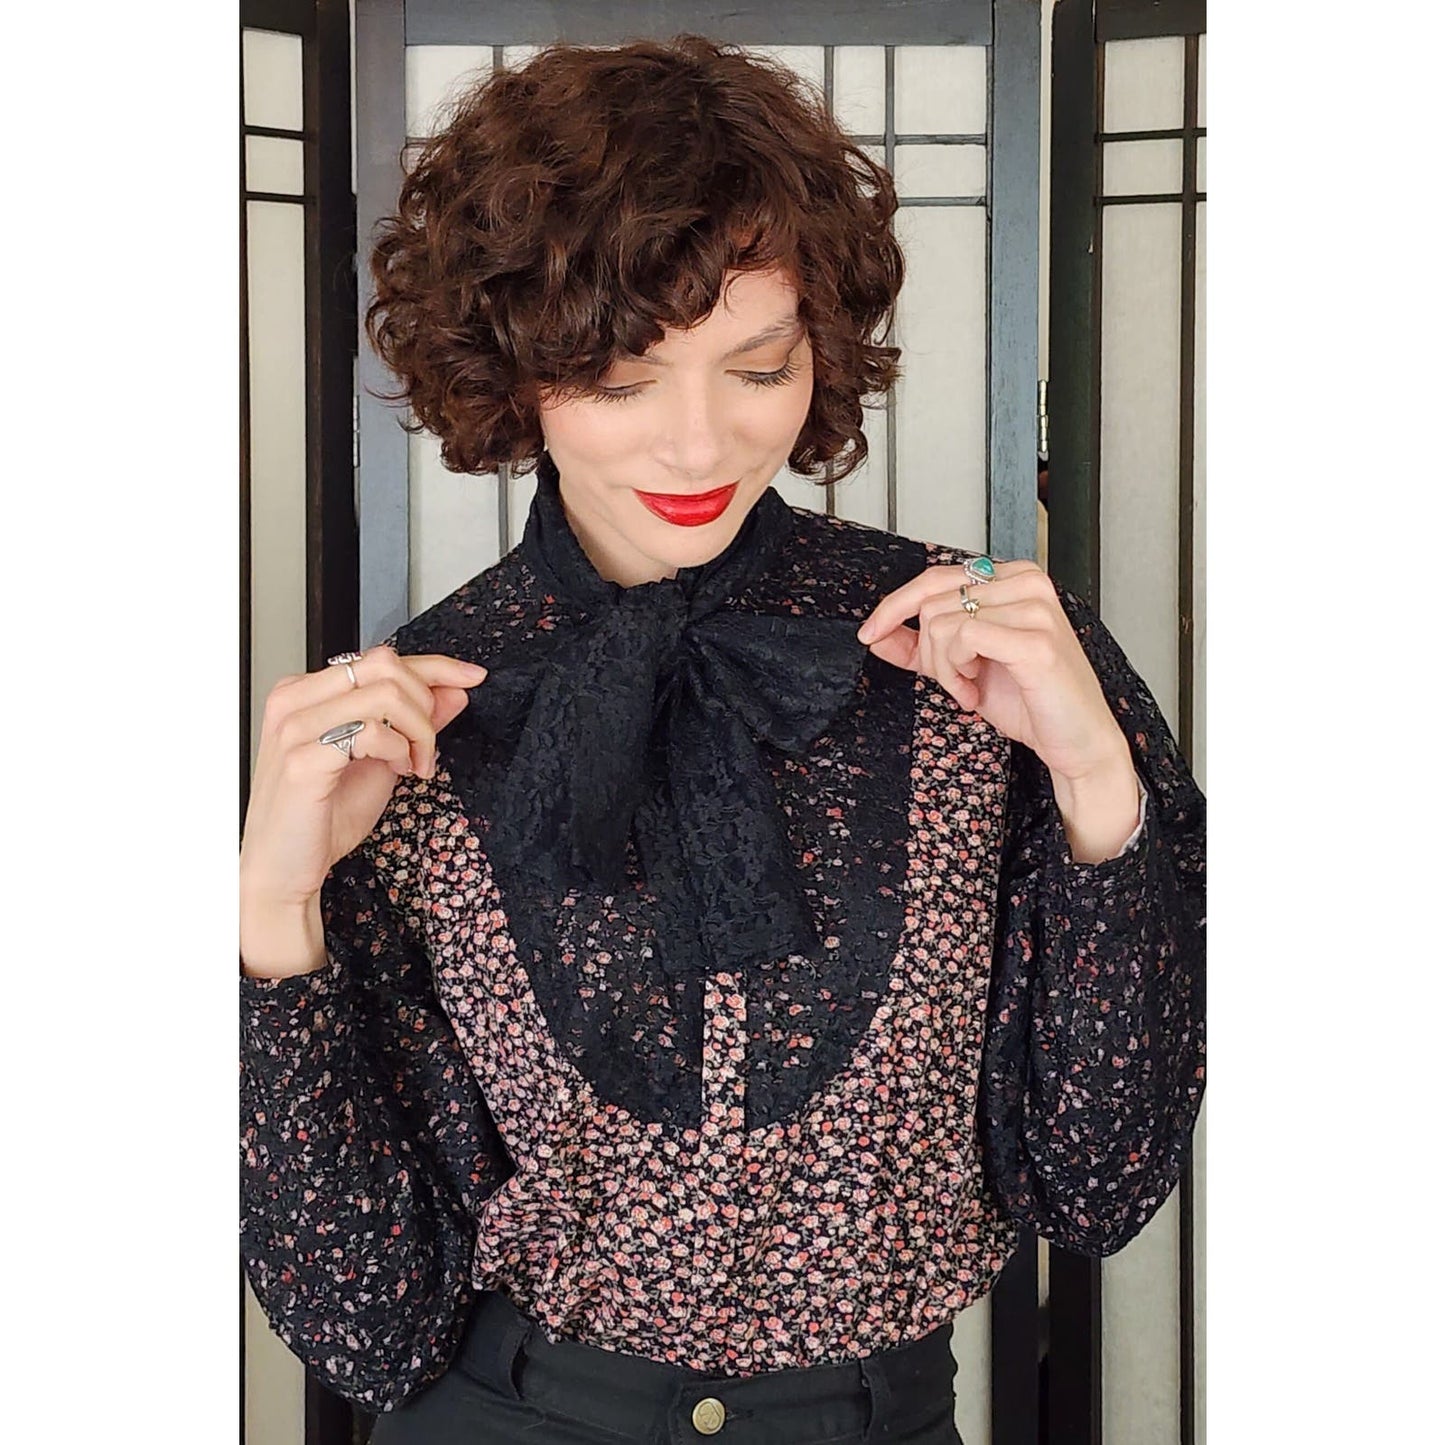 Vintage 80s Blouse Puffed Sleeves Dark Floral Print w/Black Lace Neck Scarf